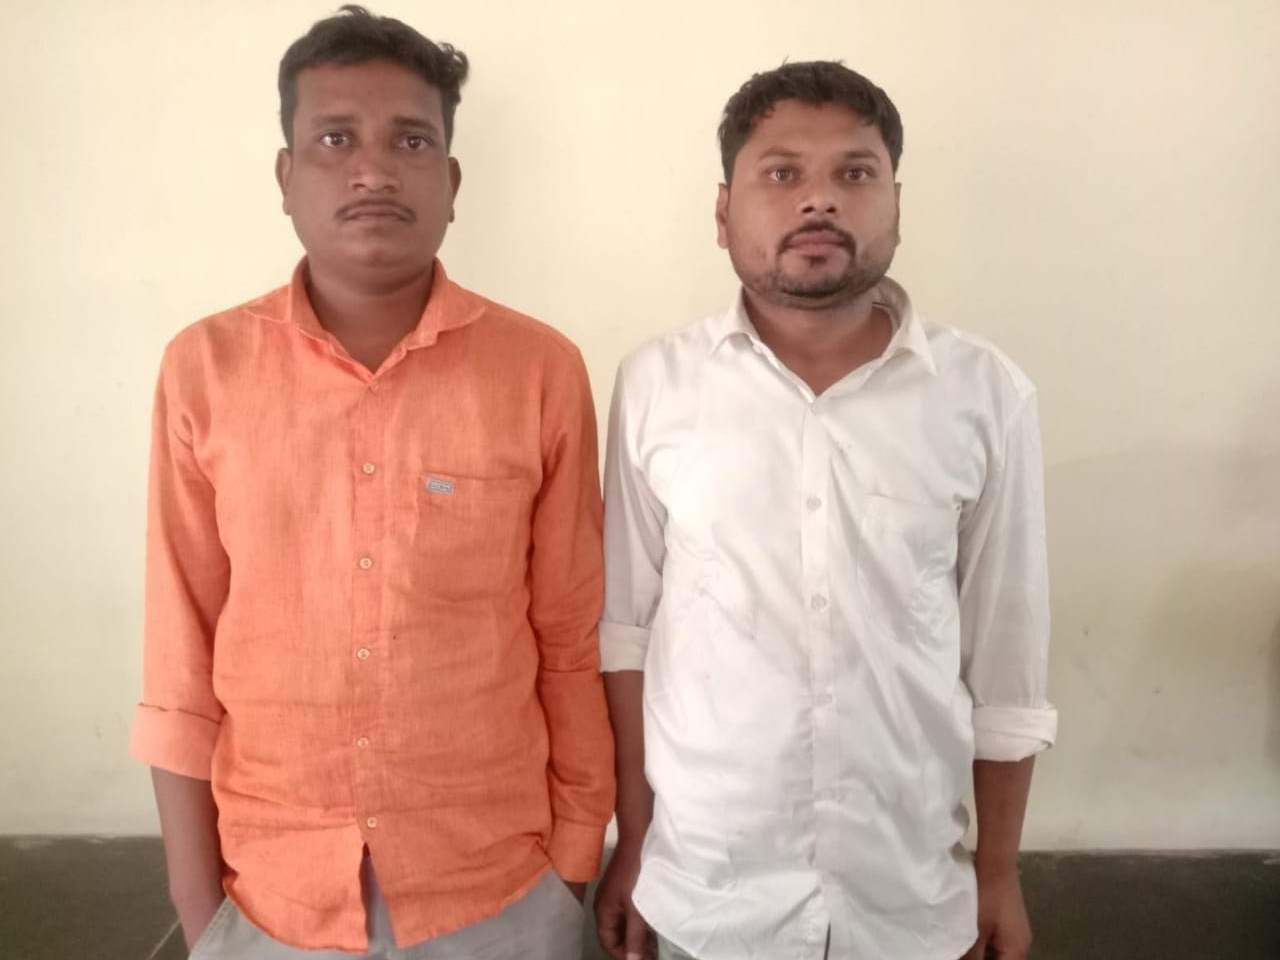 NTPC के निजी सुरक्षा गार्डों के साथ गालीगलौज, जान से मारने की भी दी धमकी | 2 youths arrested for intimidating by showing fake pistol, Abused with NTPC’s private security guards, also threatened to kill